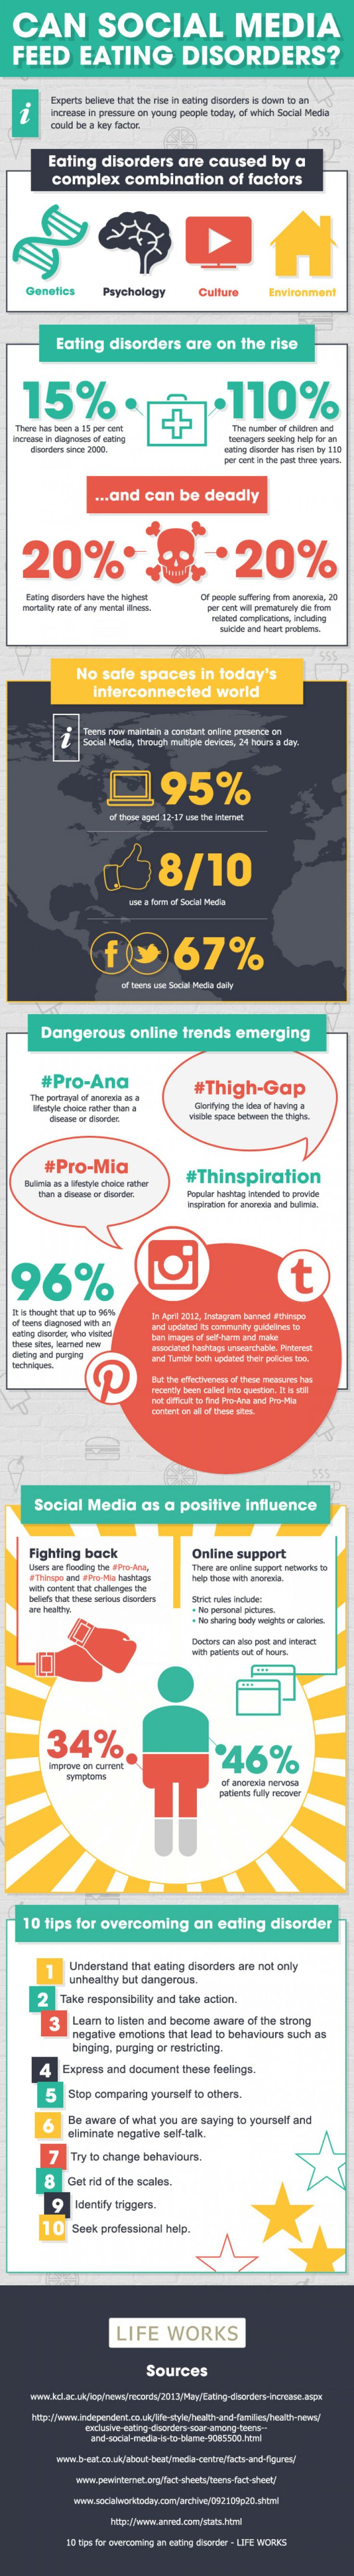 Is Social Media Eliminating Eating Disorders Or Making It Worse - Infographic